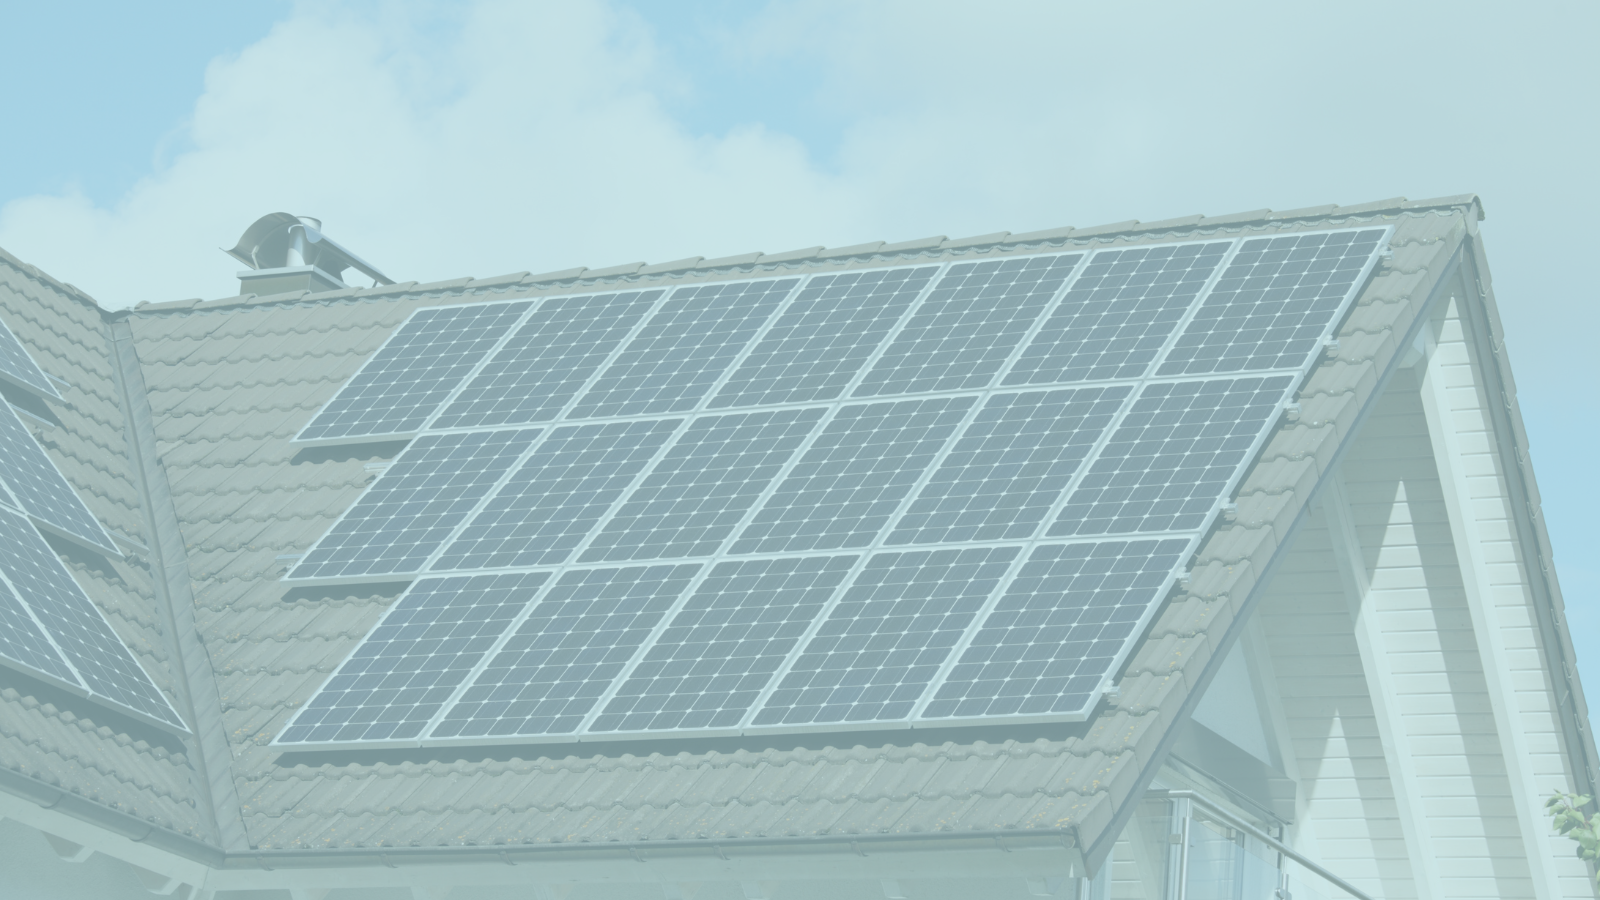 Expanding low-income solar access in Minnesota